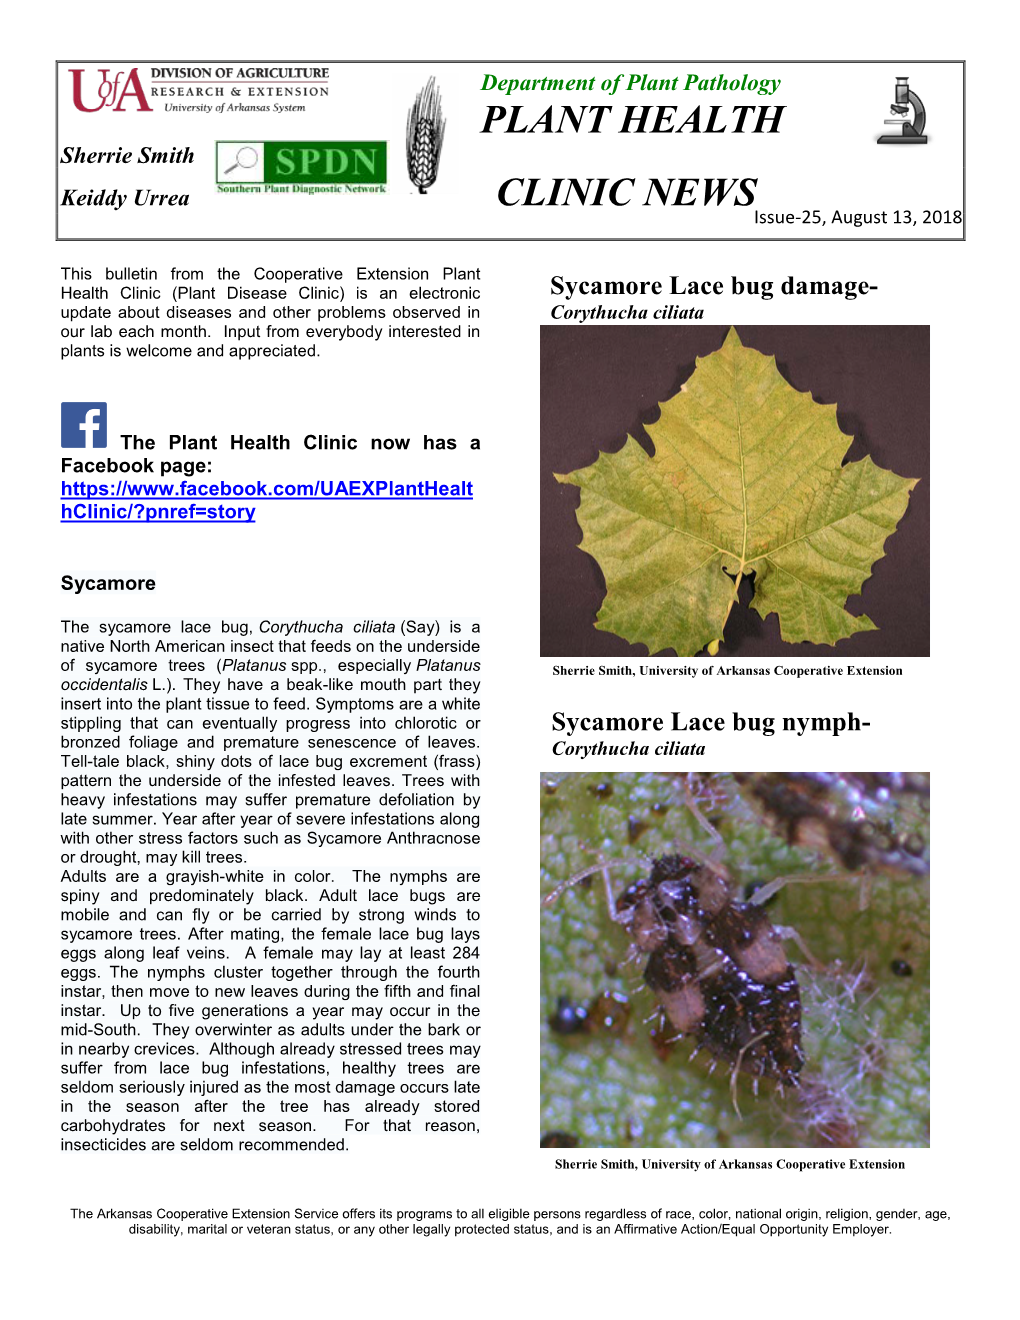 Plant Health Clinic Newsletter-Issue 25, 2018